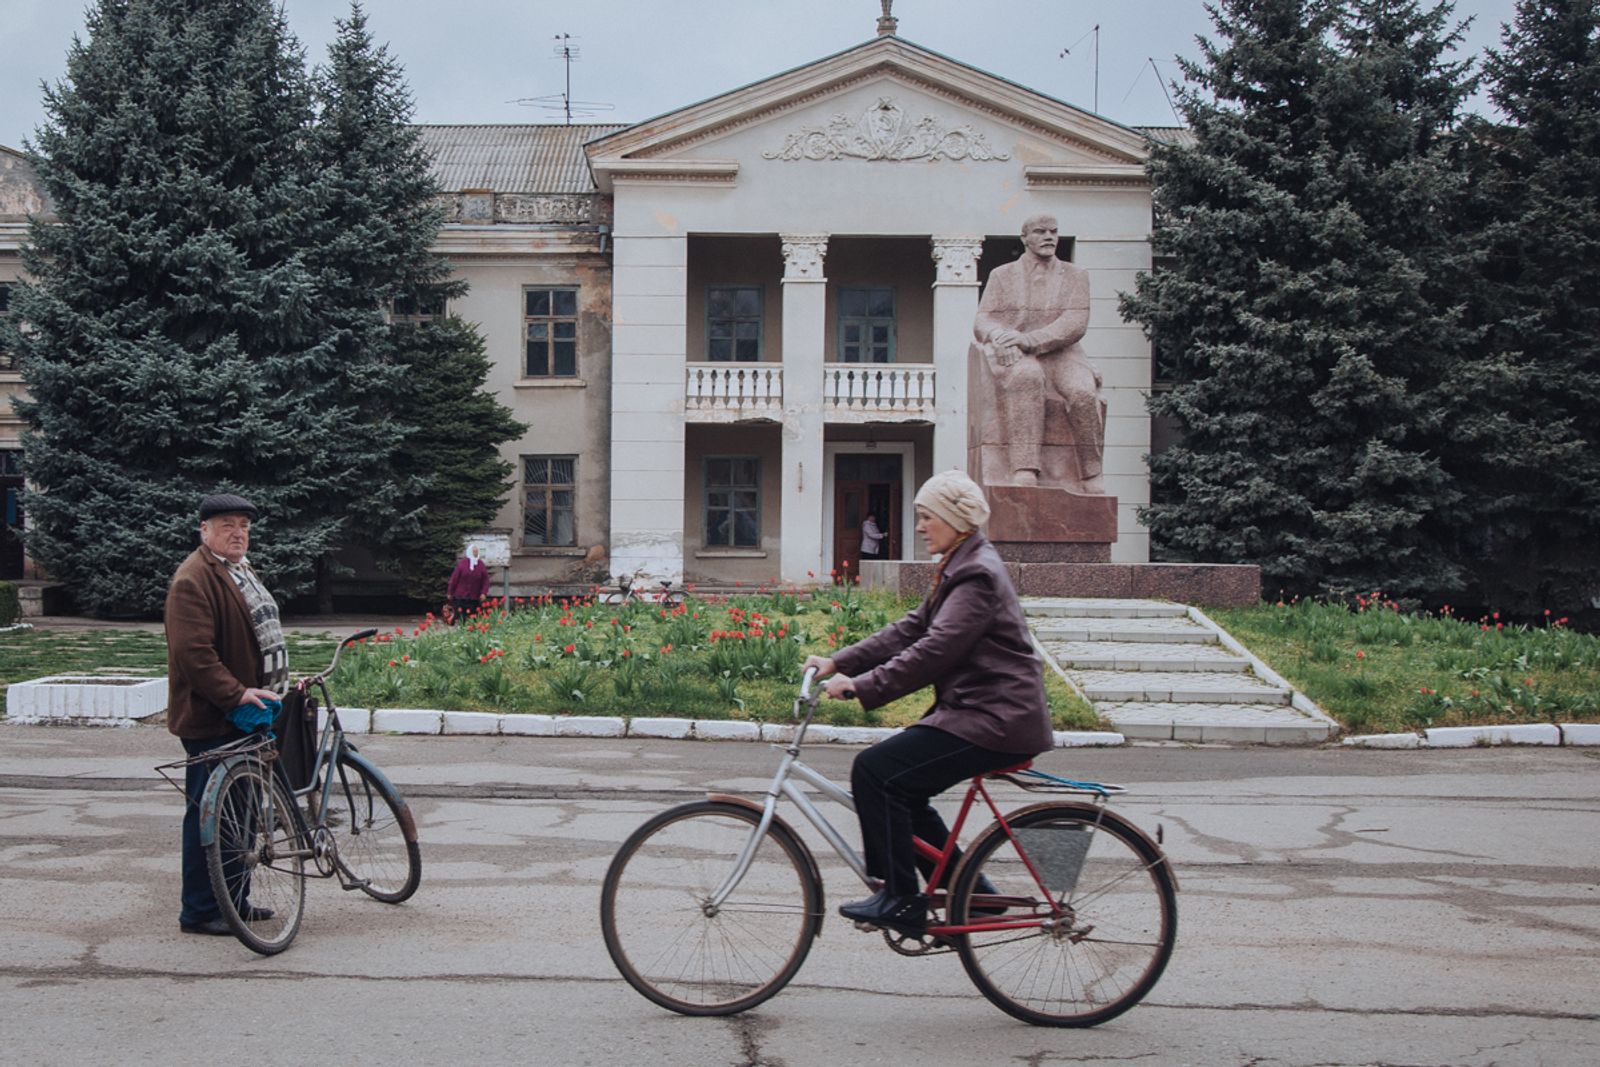 © Anton Polyakov - Image from the TRANSNISTRIA CONGLOMERATE photography project